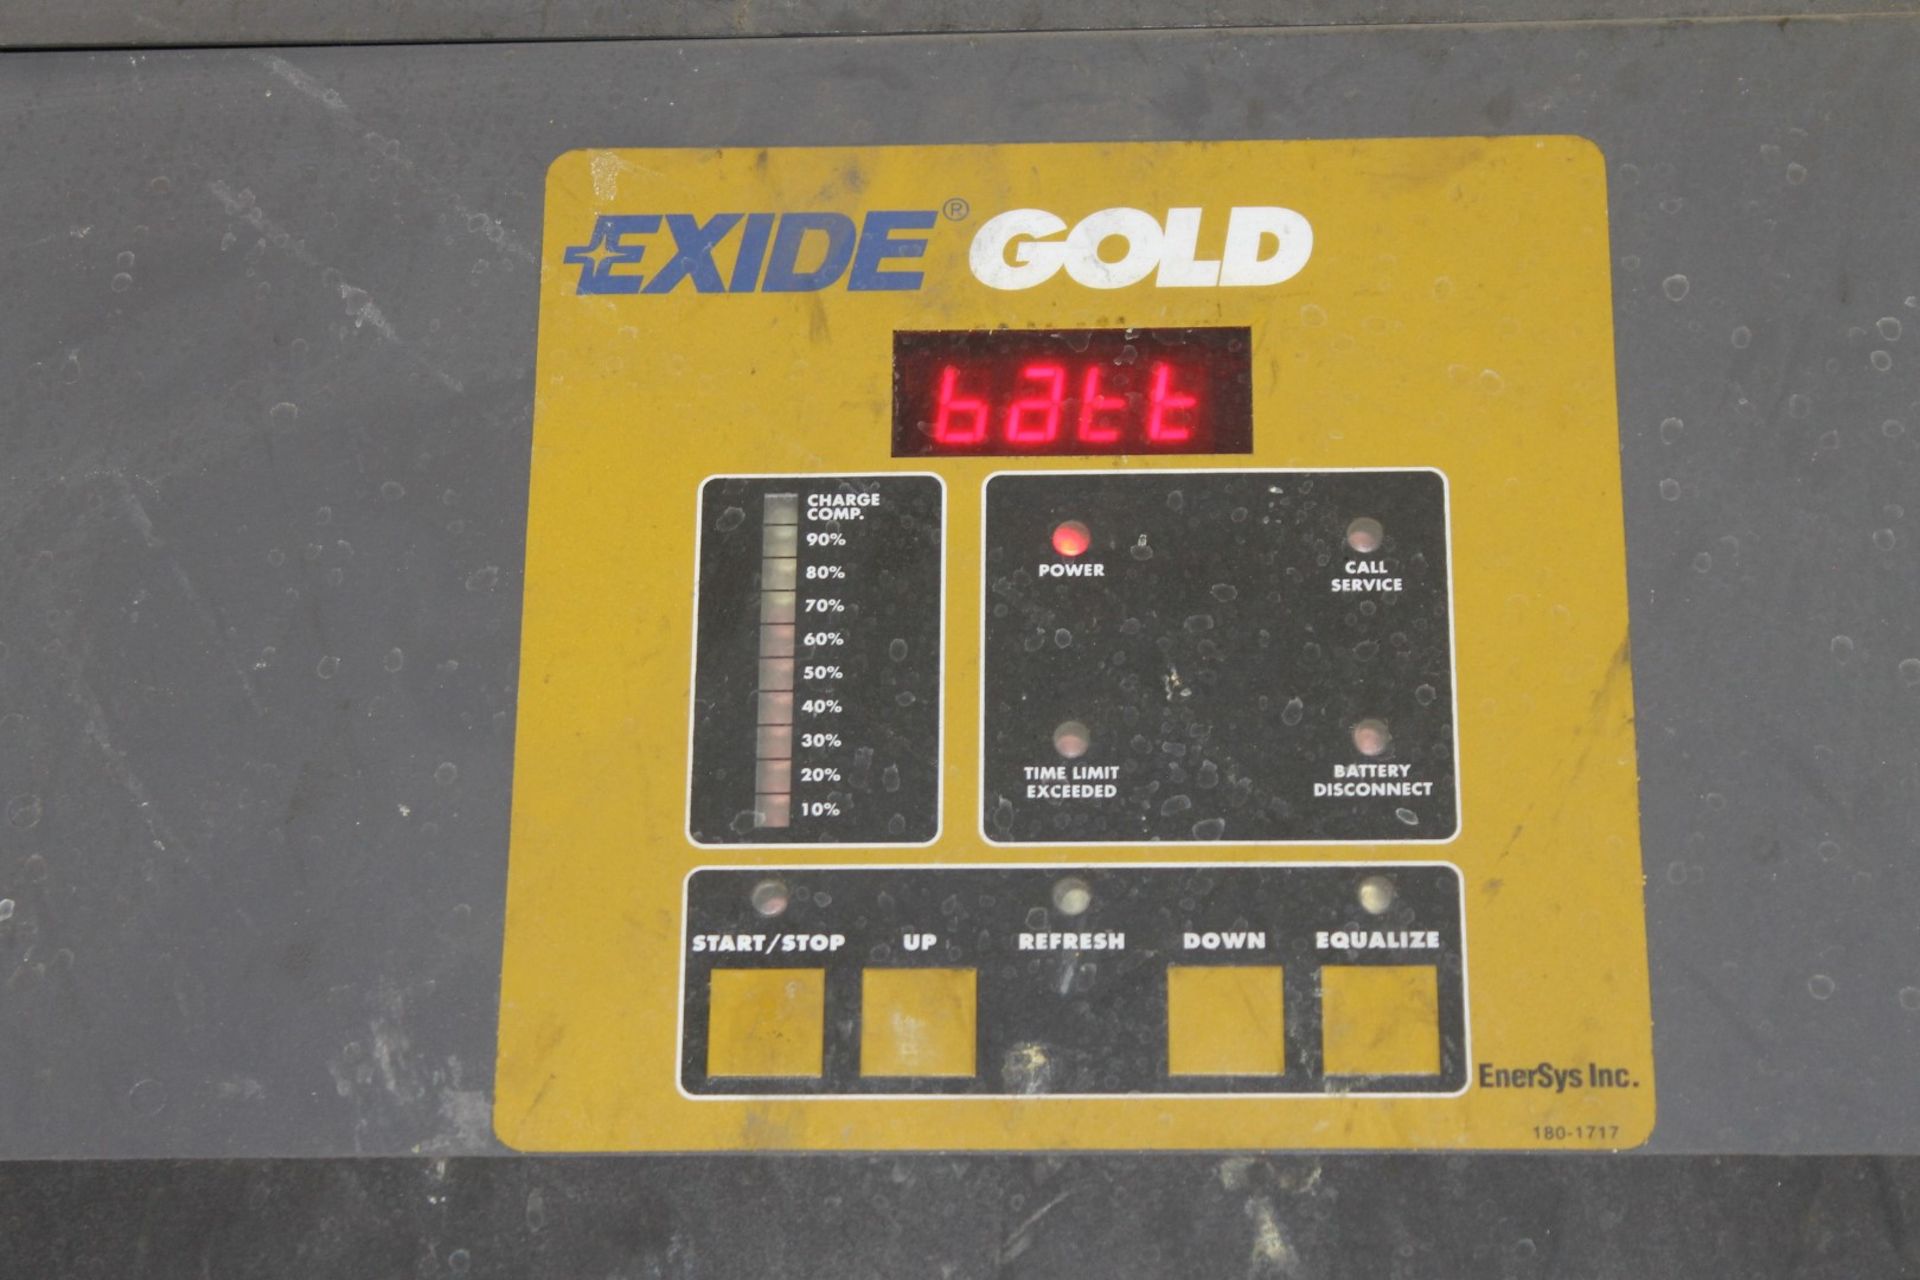 EXIDE GOLD 36 VOLTS INDUSTRIAL BATTERY CHARGER, CAPACITY 960 AMP HRS, WORKHOG - Image 2 of 3